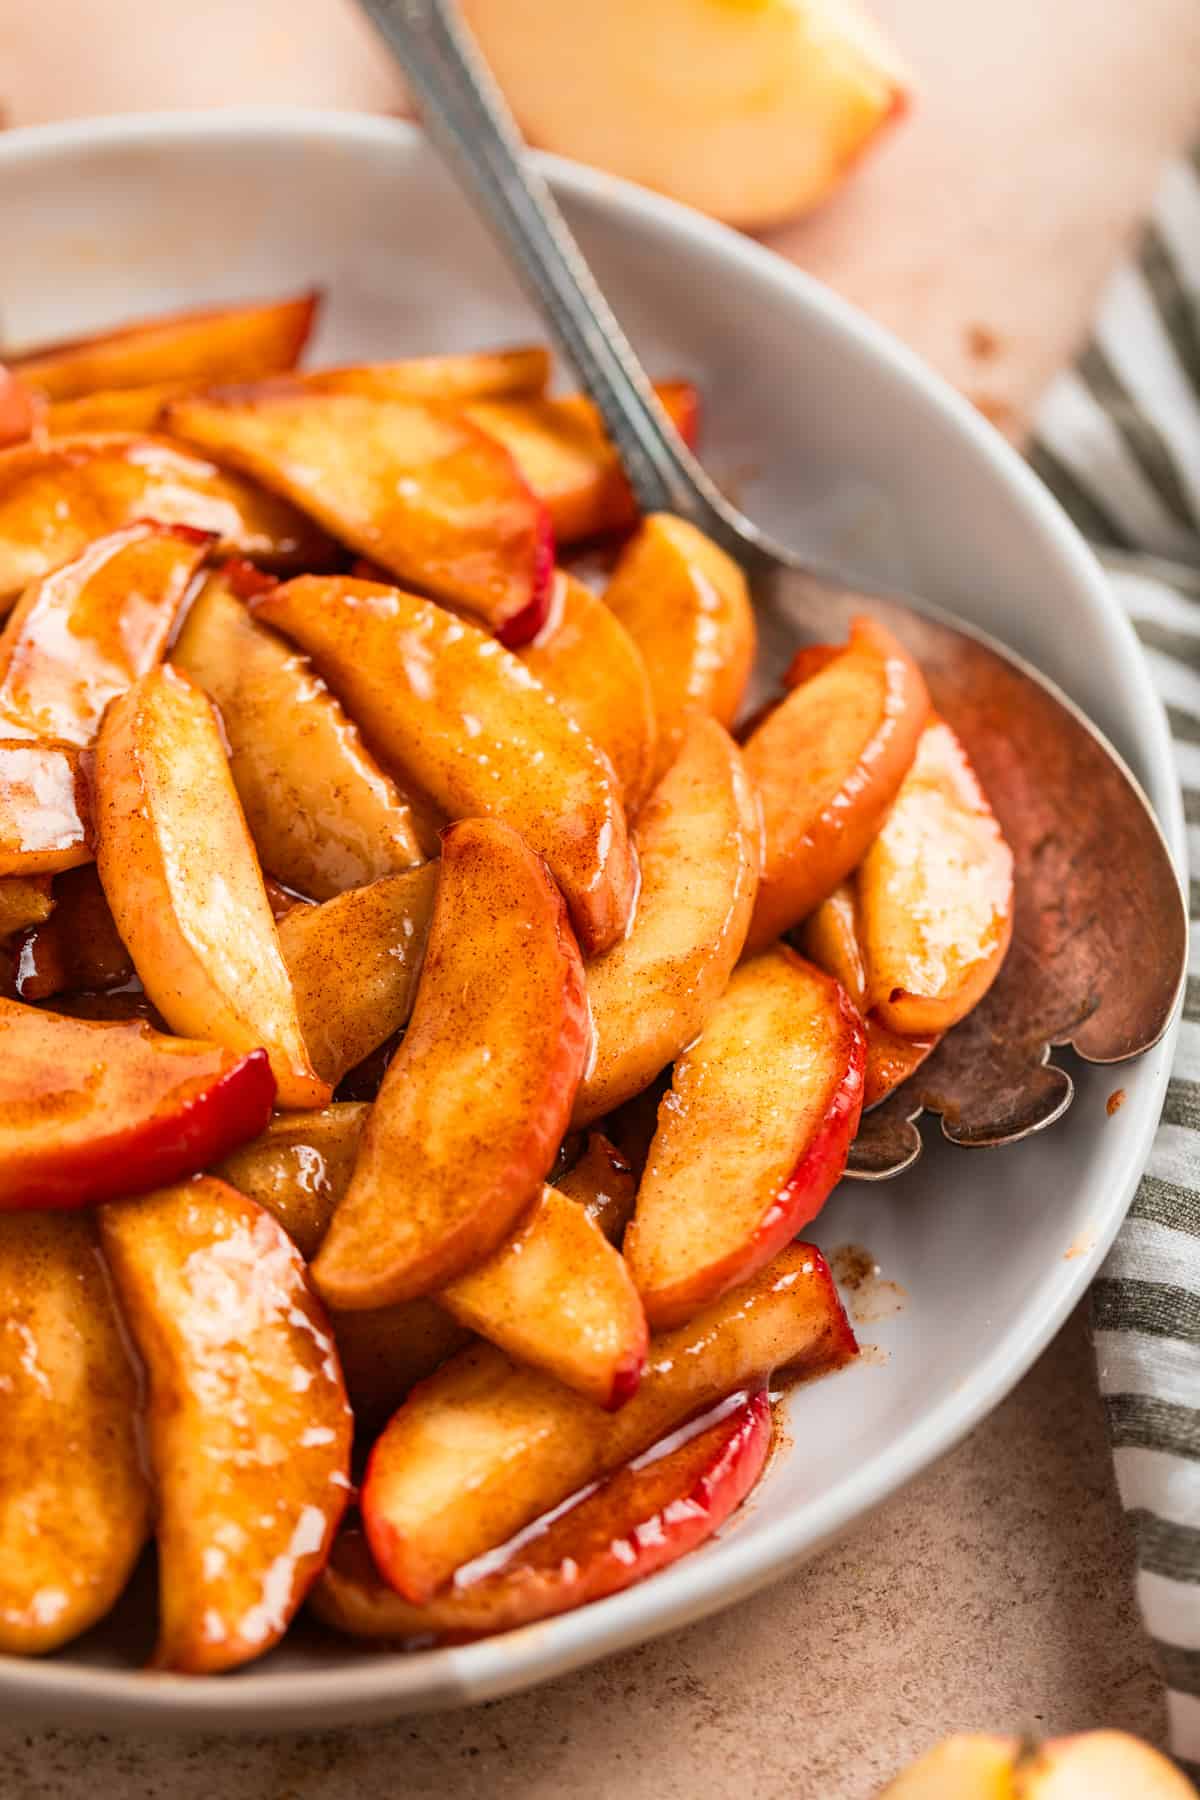 Dish with cinnamon air fryer apples with serving spoon.